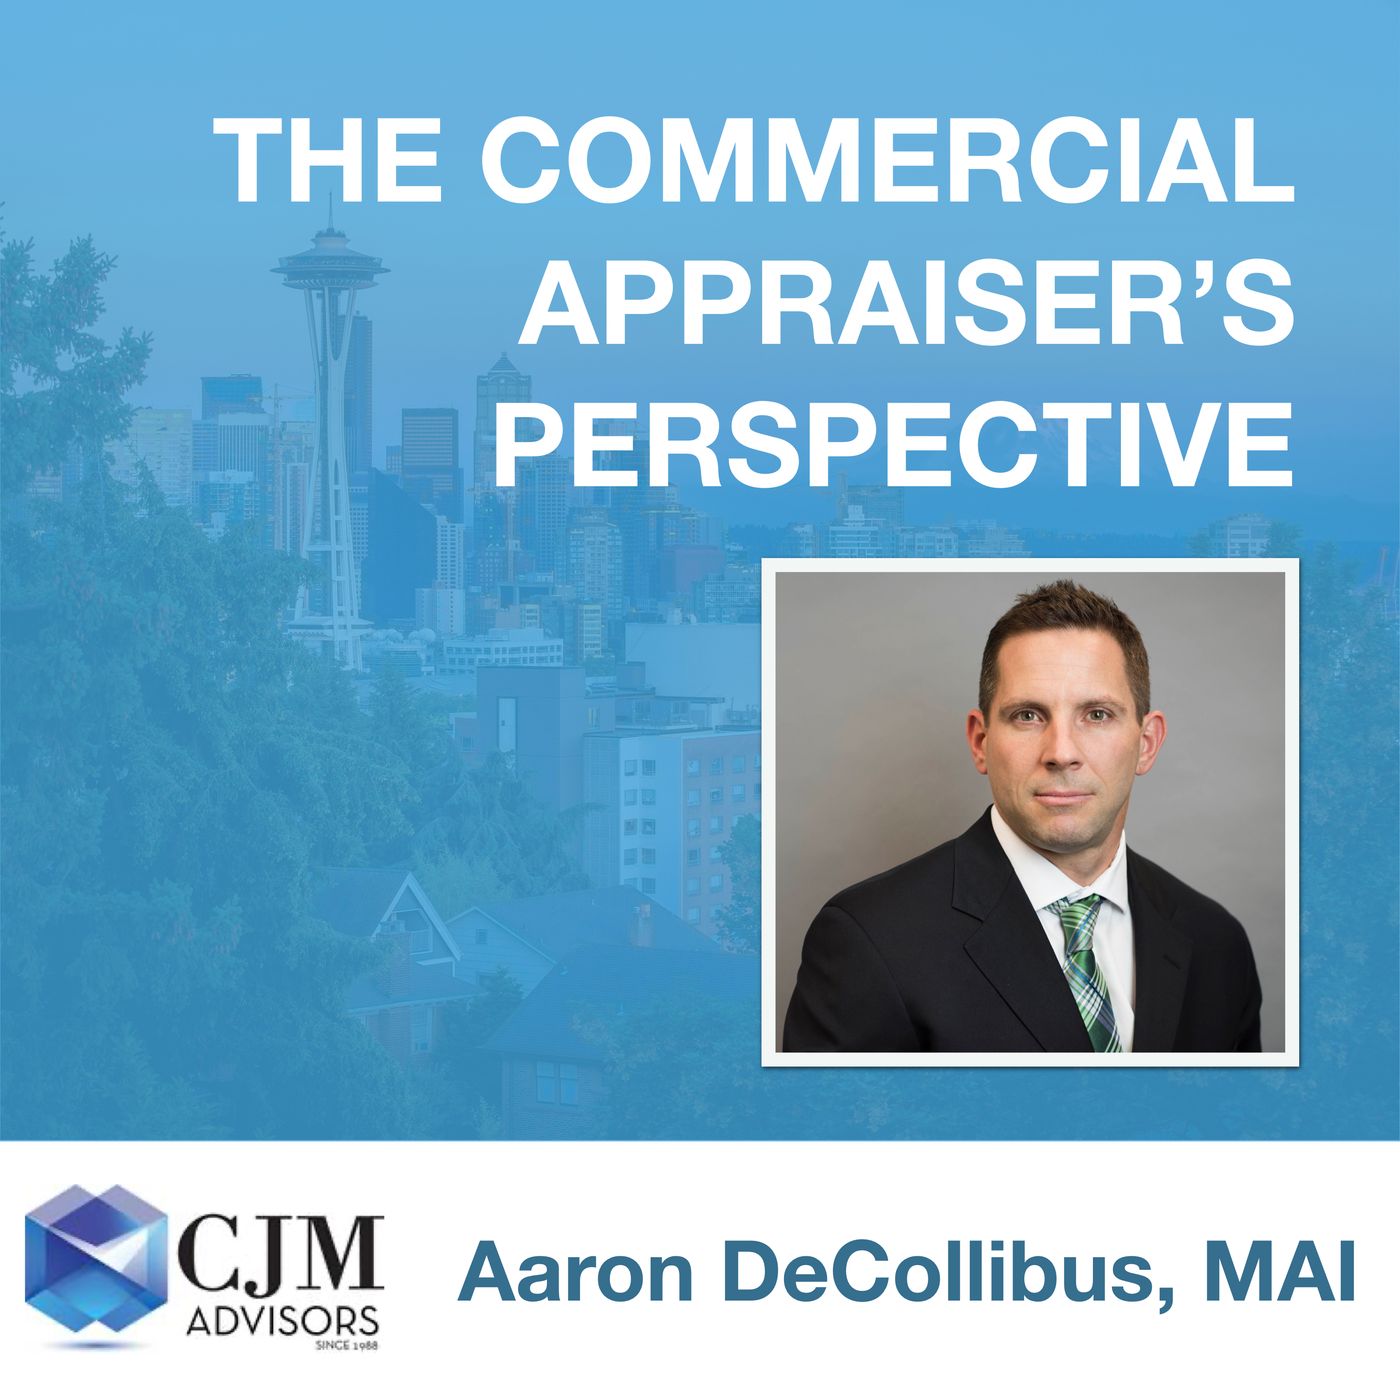 The Commercial Appraiser's Perspective